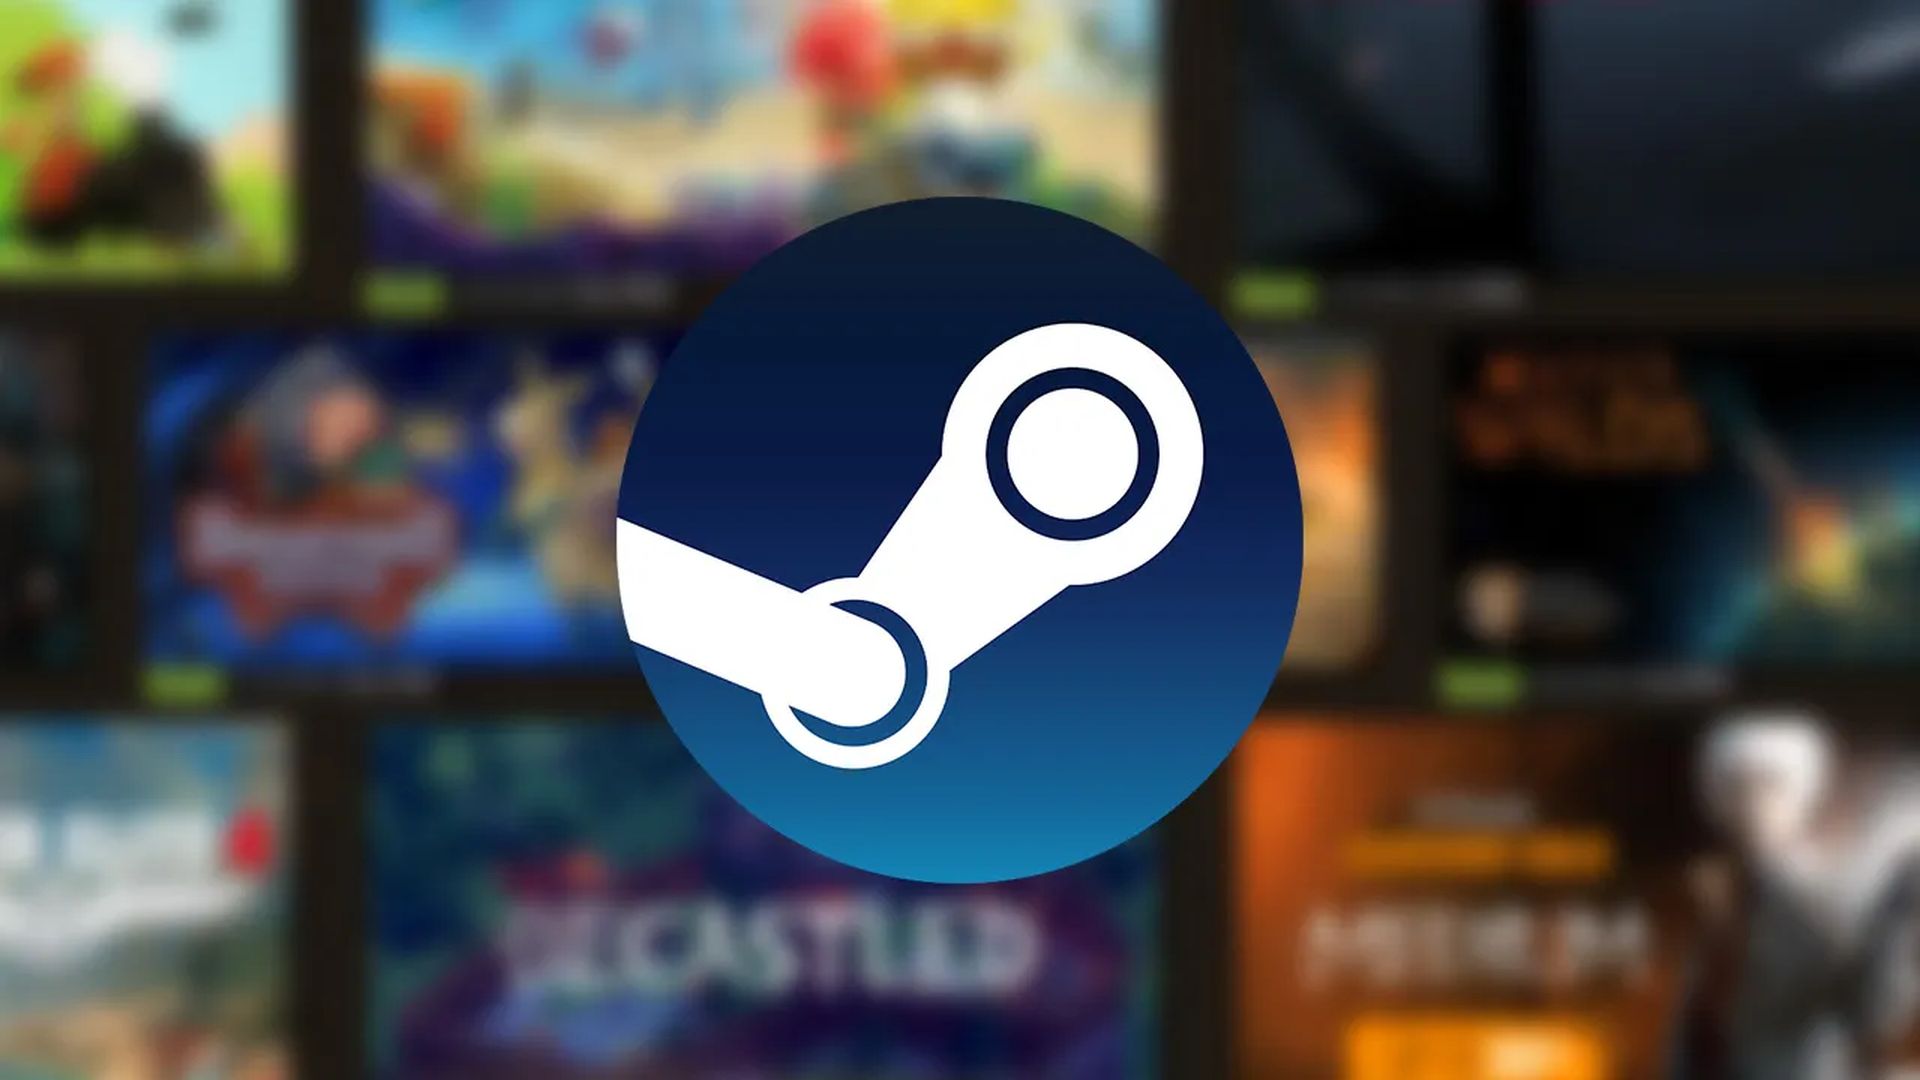 Steam bans award logos and review scores from game images